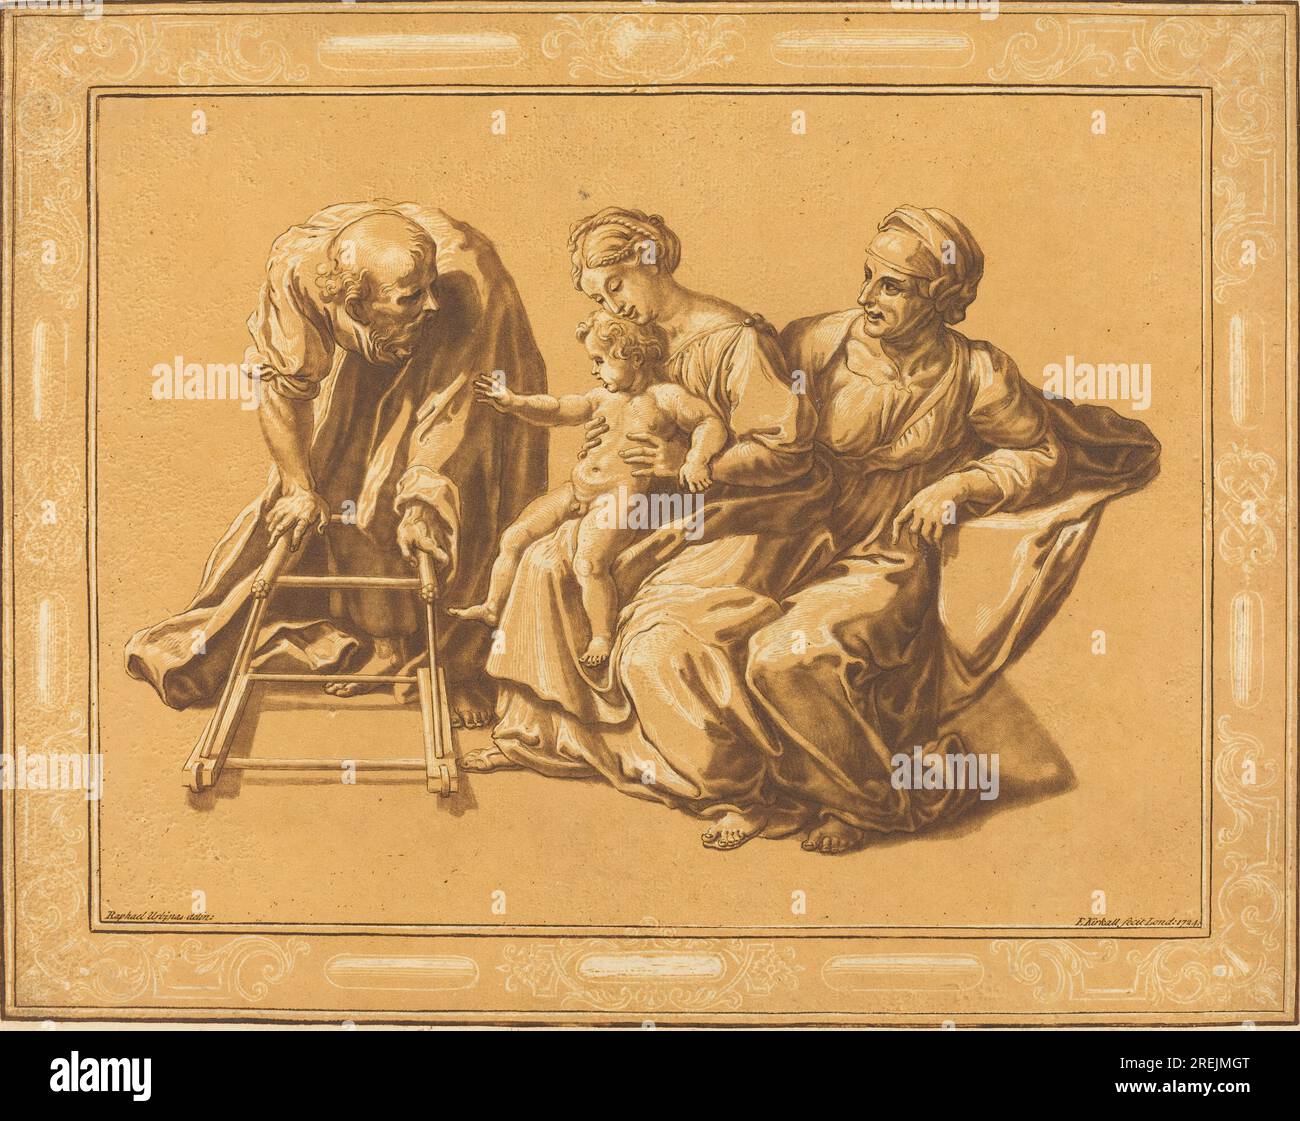 'Elisha Kirkall after Raphael, The Holy Family, 1724, etching and mezzotint with woodcut printed in brown and ochre on laid paper, block: 27.9 x 35.1 cm (11 x 13 13/16 in.) sheet: 29.2 x 37.5 cm (11 1/2 x 14 3/4 in.), Paul Mellon Fund, 2001.118.18' Stock Photo